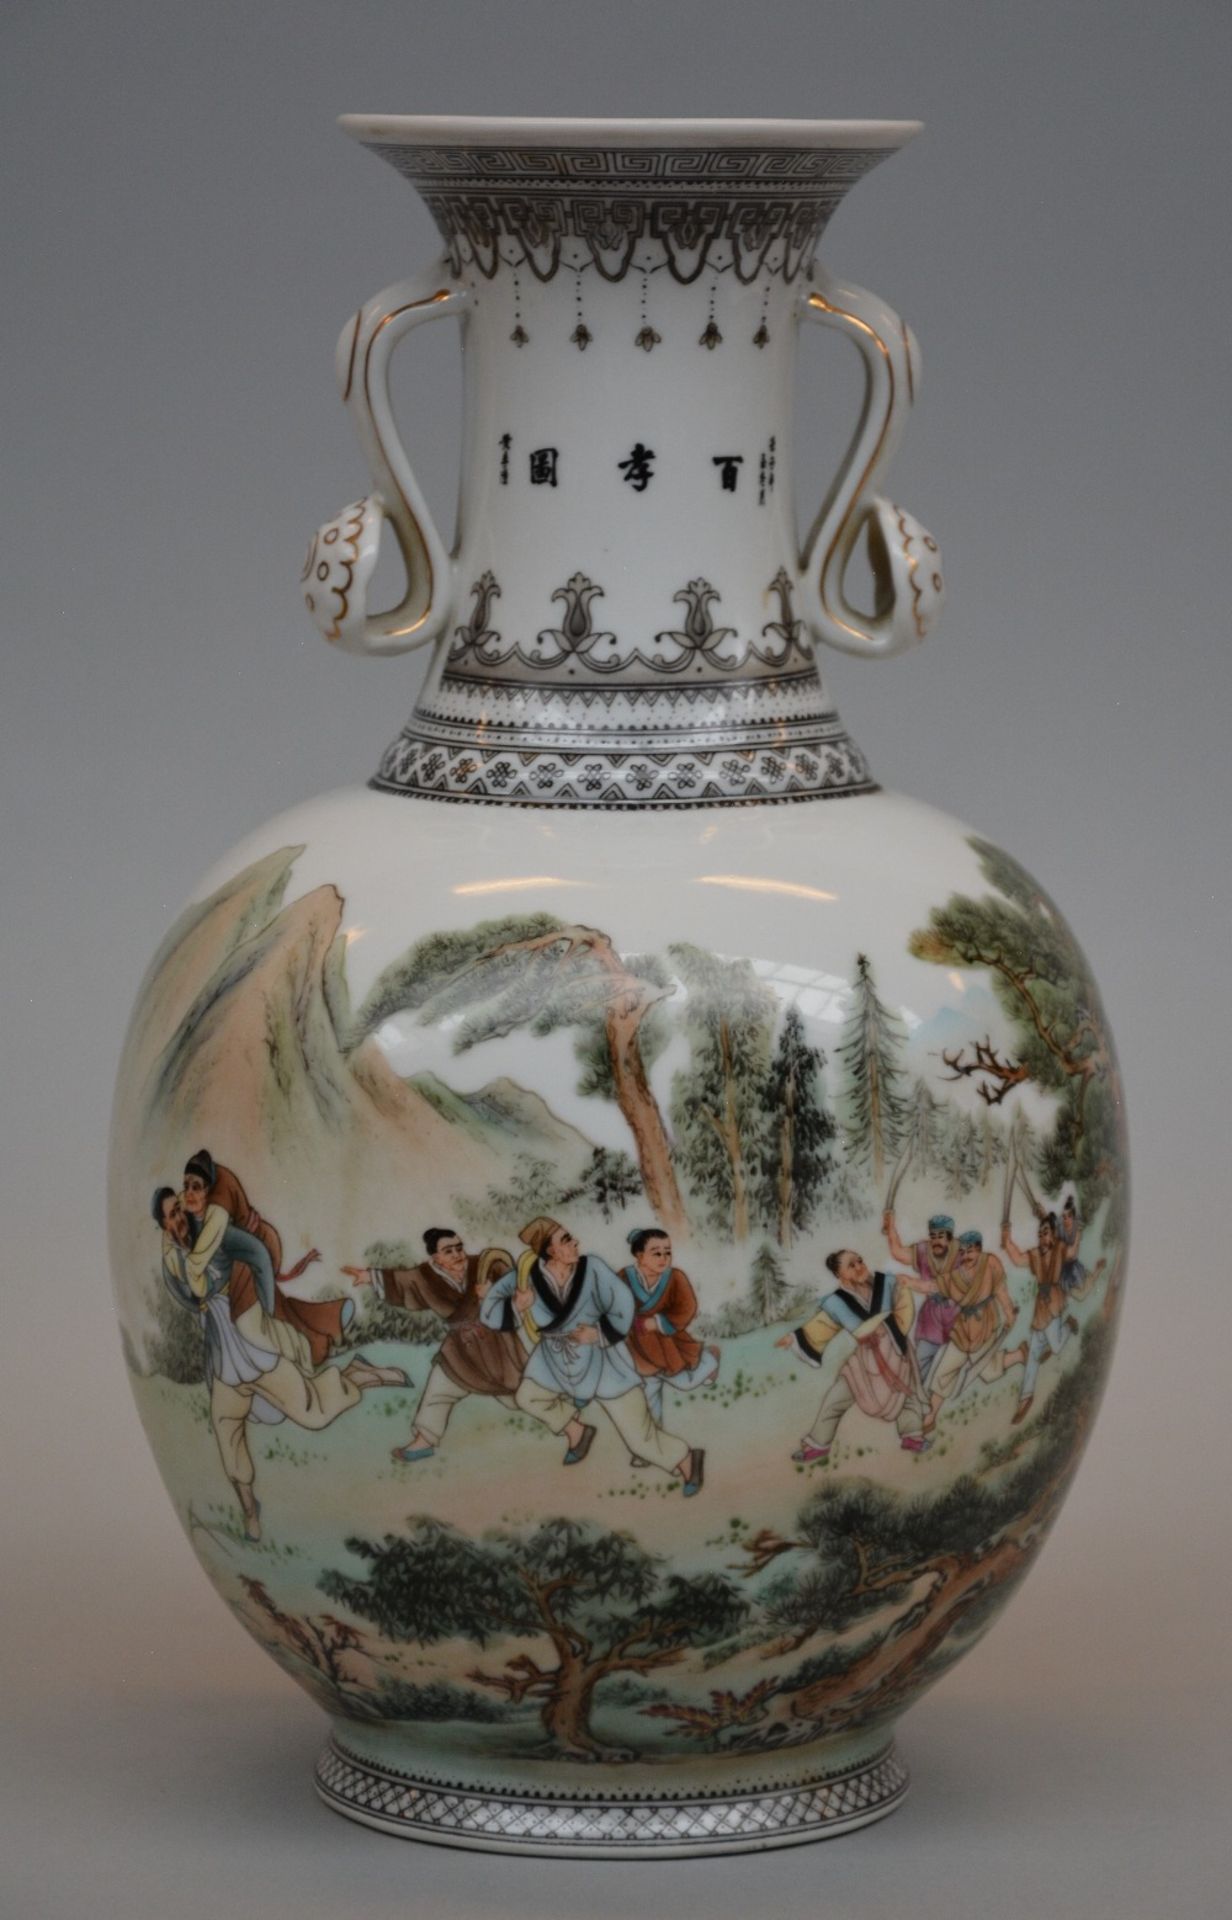 A Chinese polychrome vase depicting one of the stories from The 24 Paragons of Filial Piety ("Er Shi